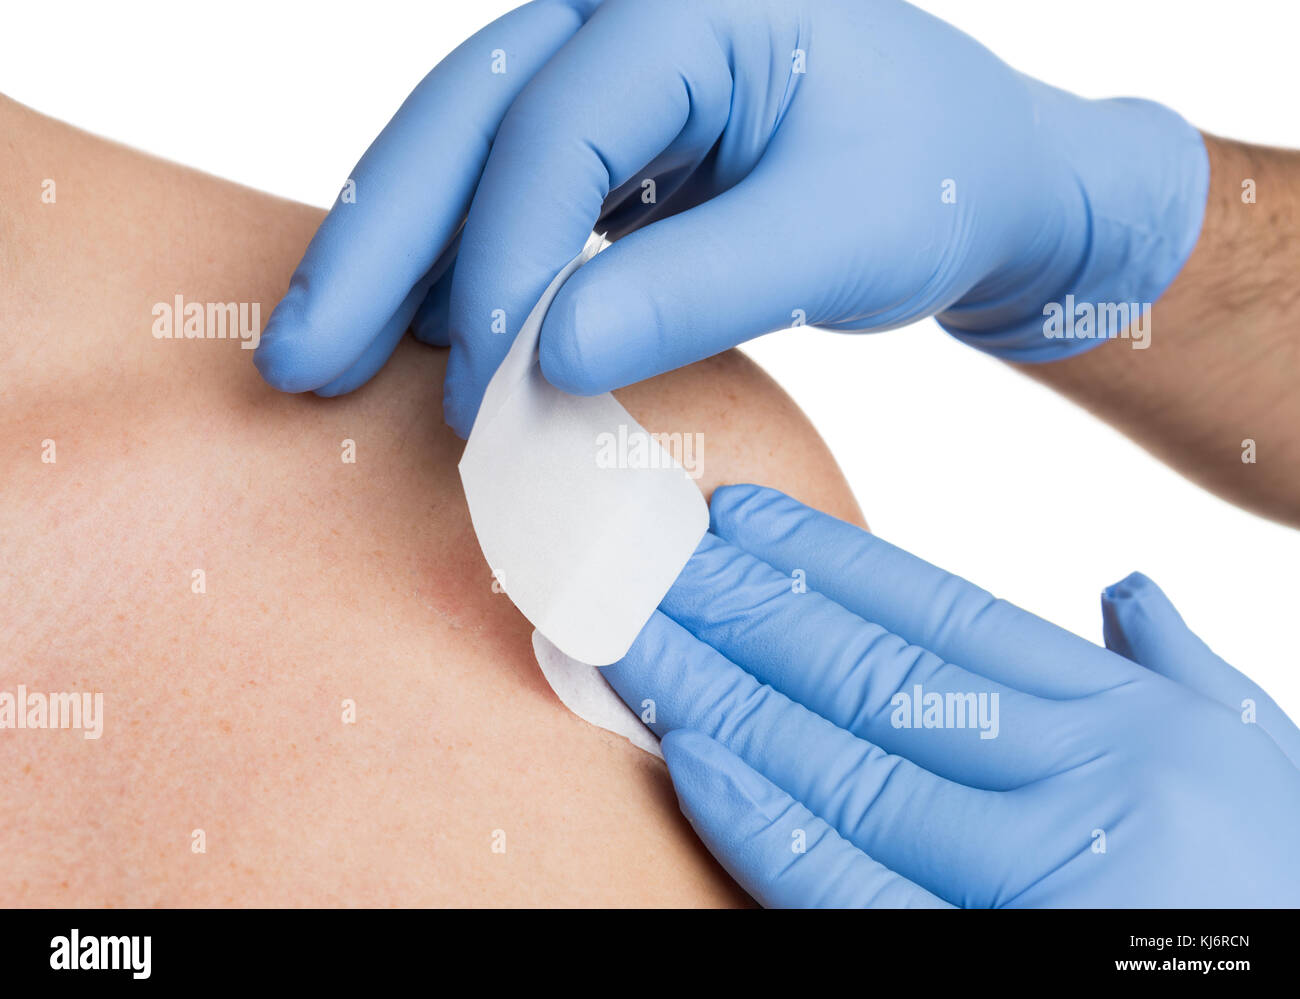 Nurse hand patching mole removal surgery incision as epidermal birthmark concept Stock Photo